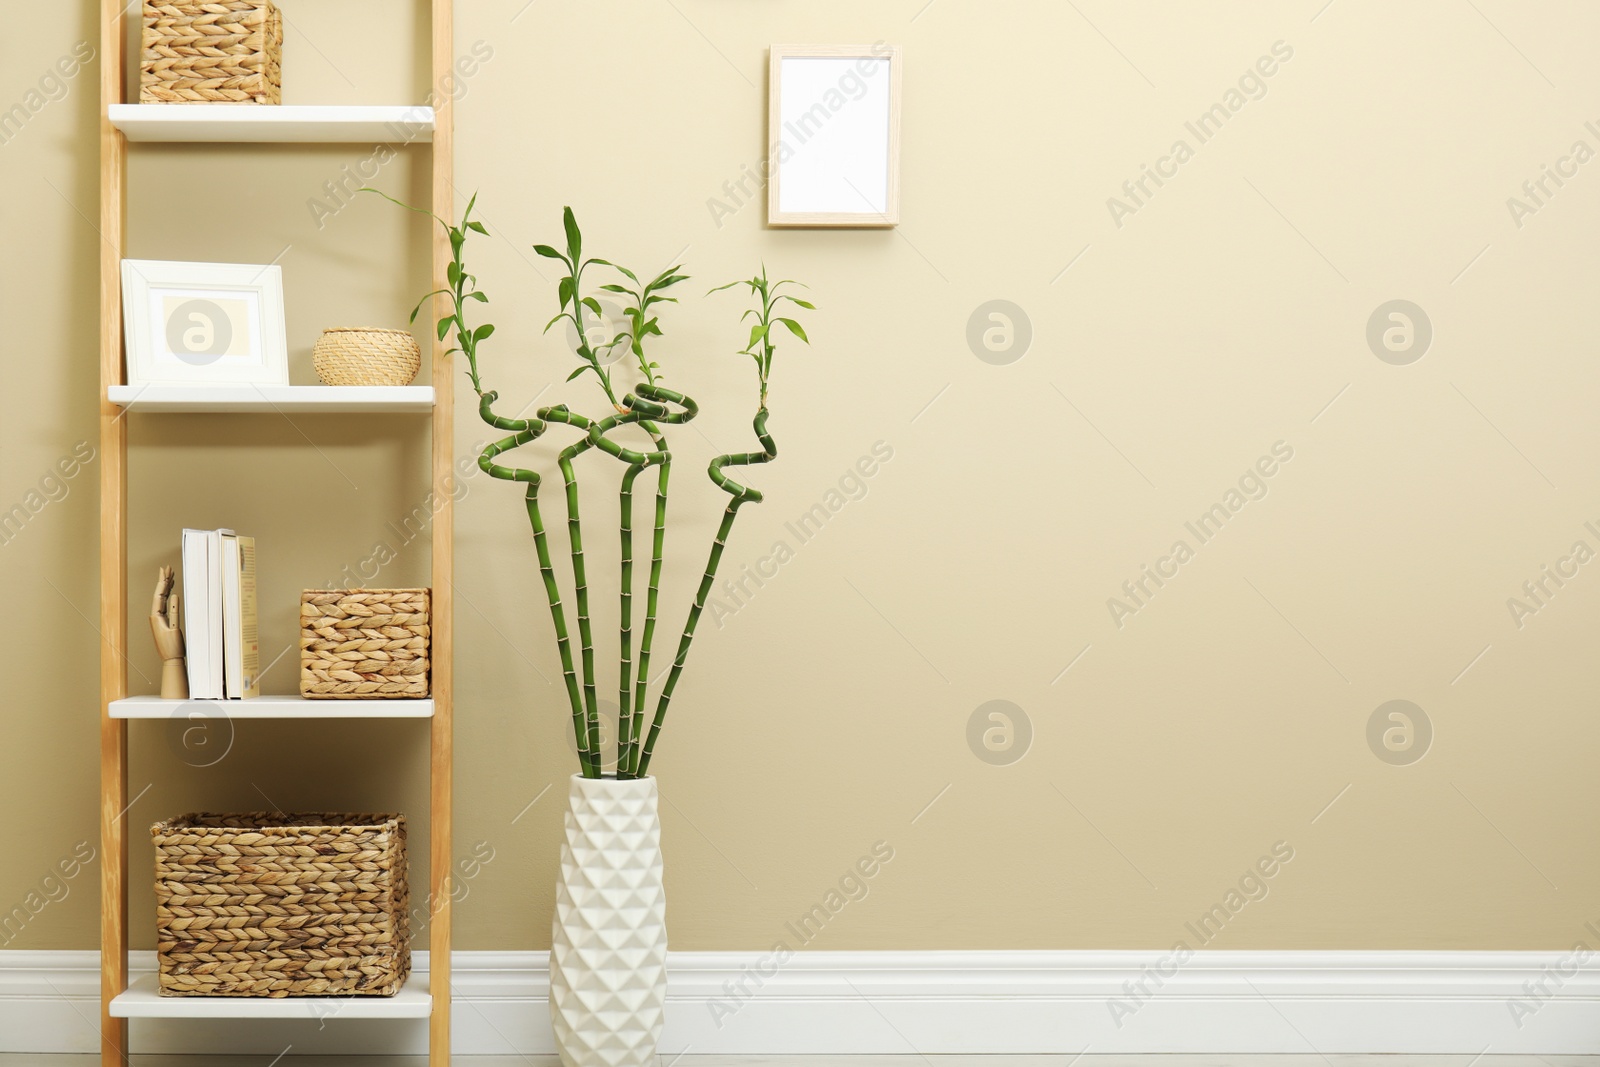 Photo of Vase with green bamboo stems and decorative ladder near beige wall in room, space for text. Interior design